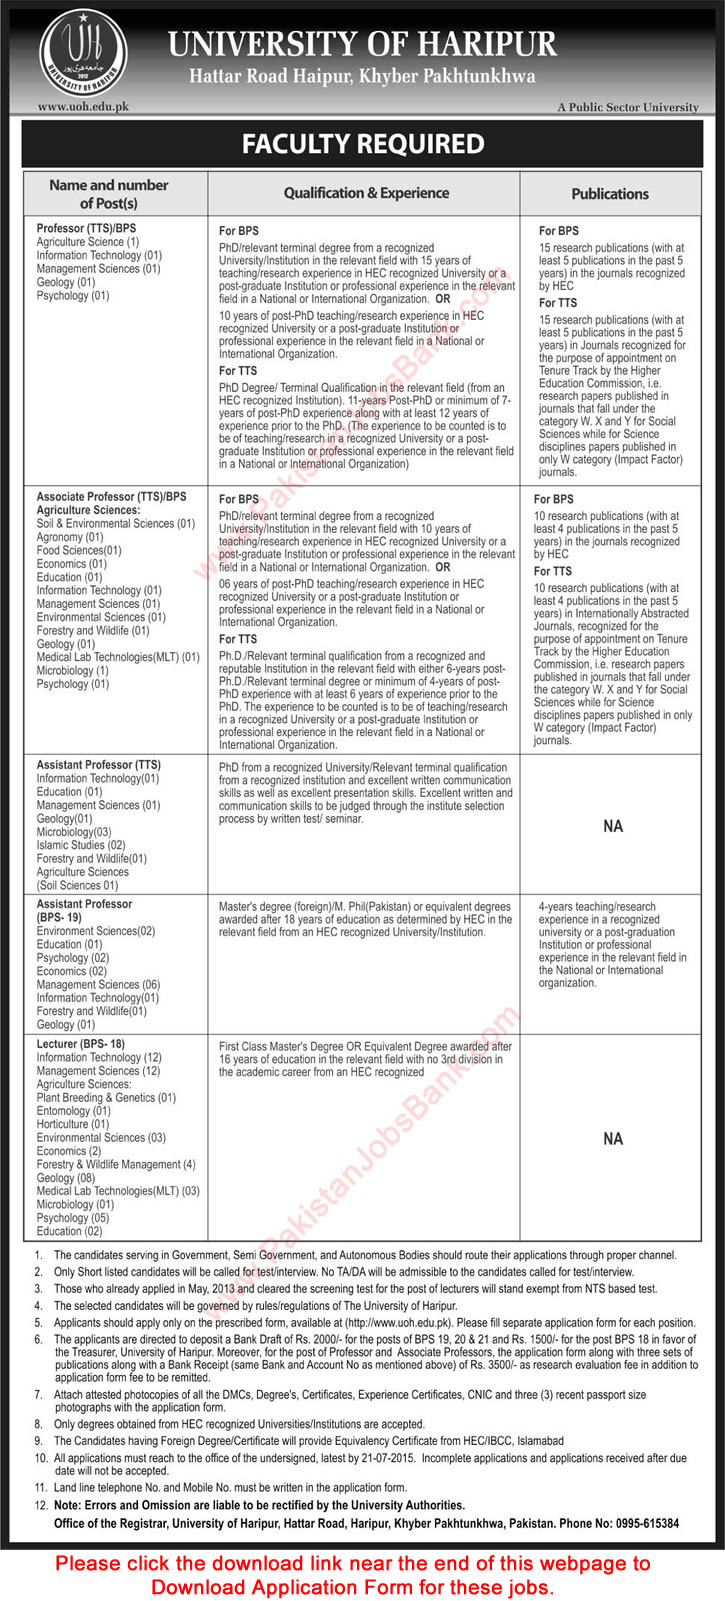 University of Haripur Jobs 2015 July KPK Application Form Download Teaching Faculty Latest